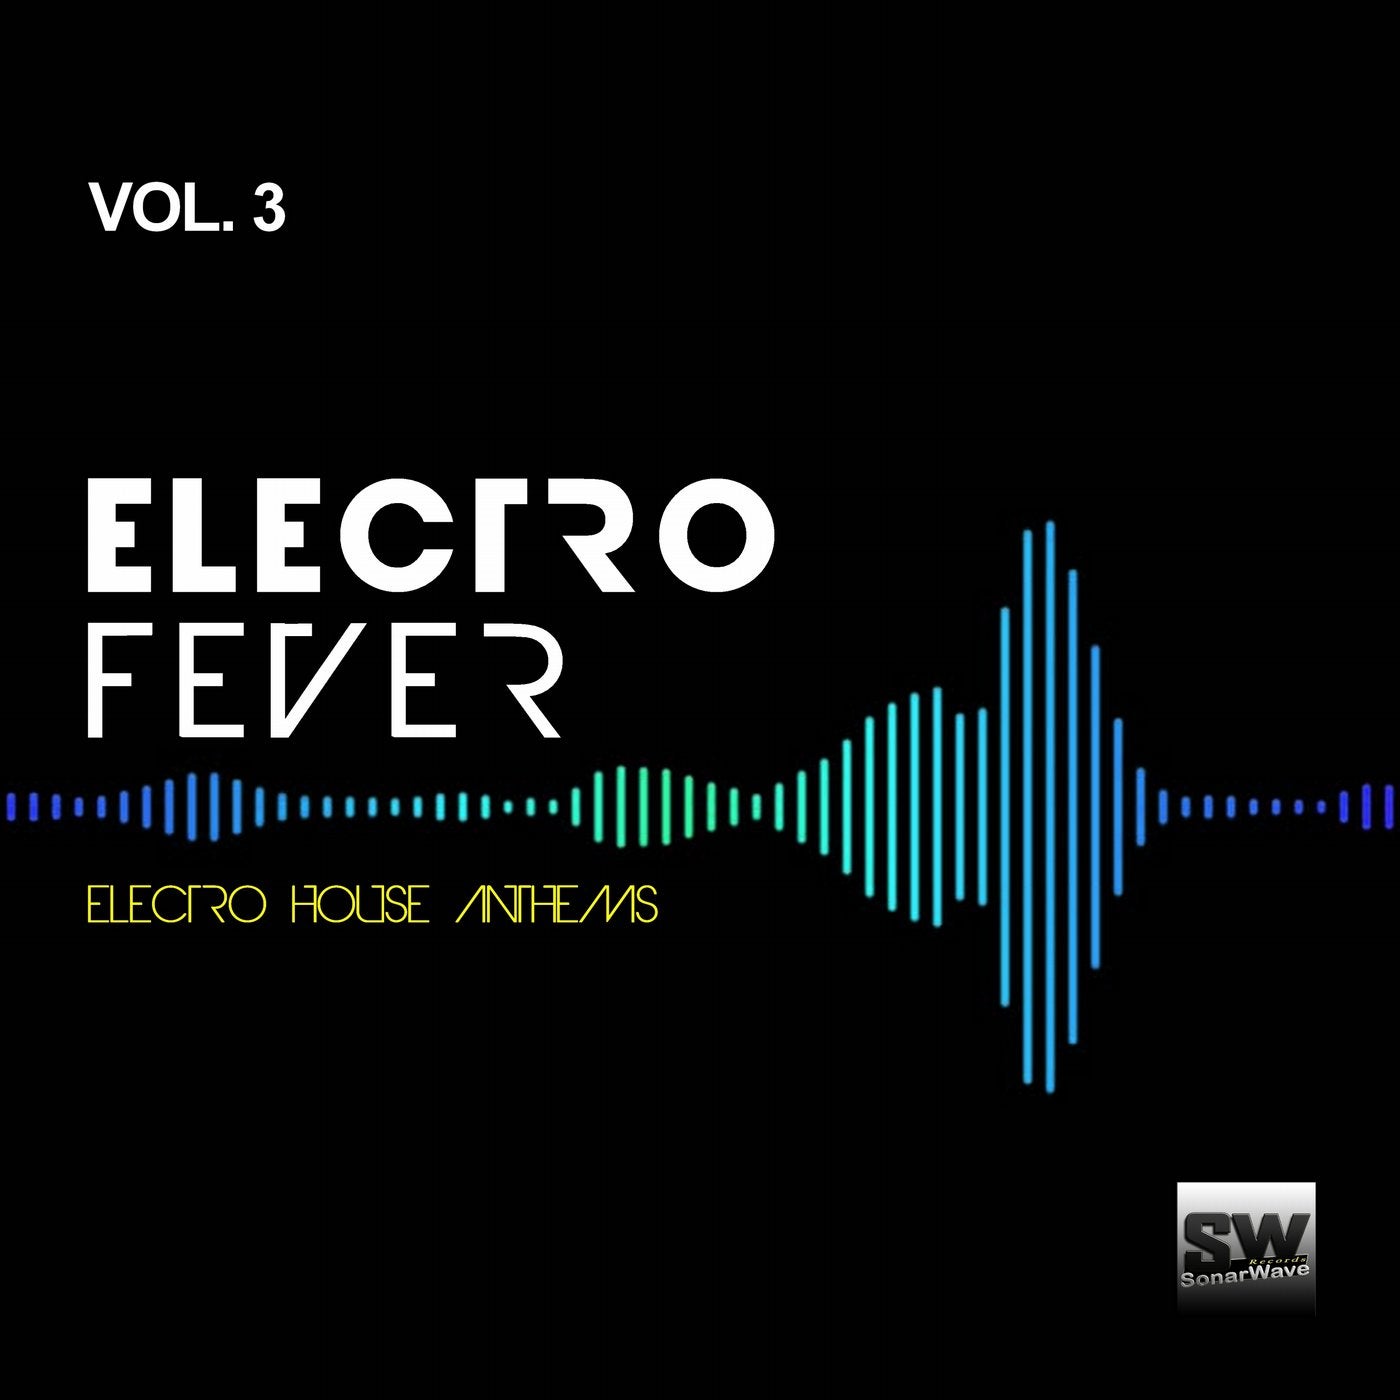 Electro Fever, Vol. 3 (Electro House Anthems)